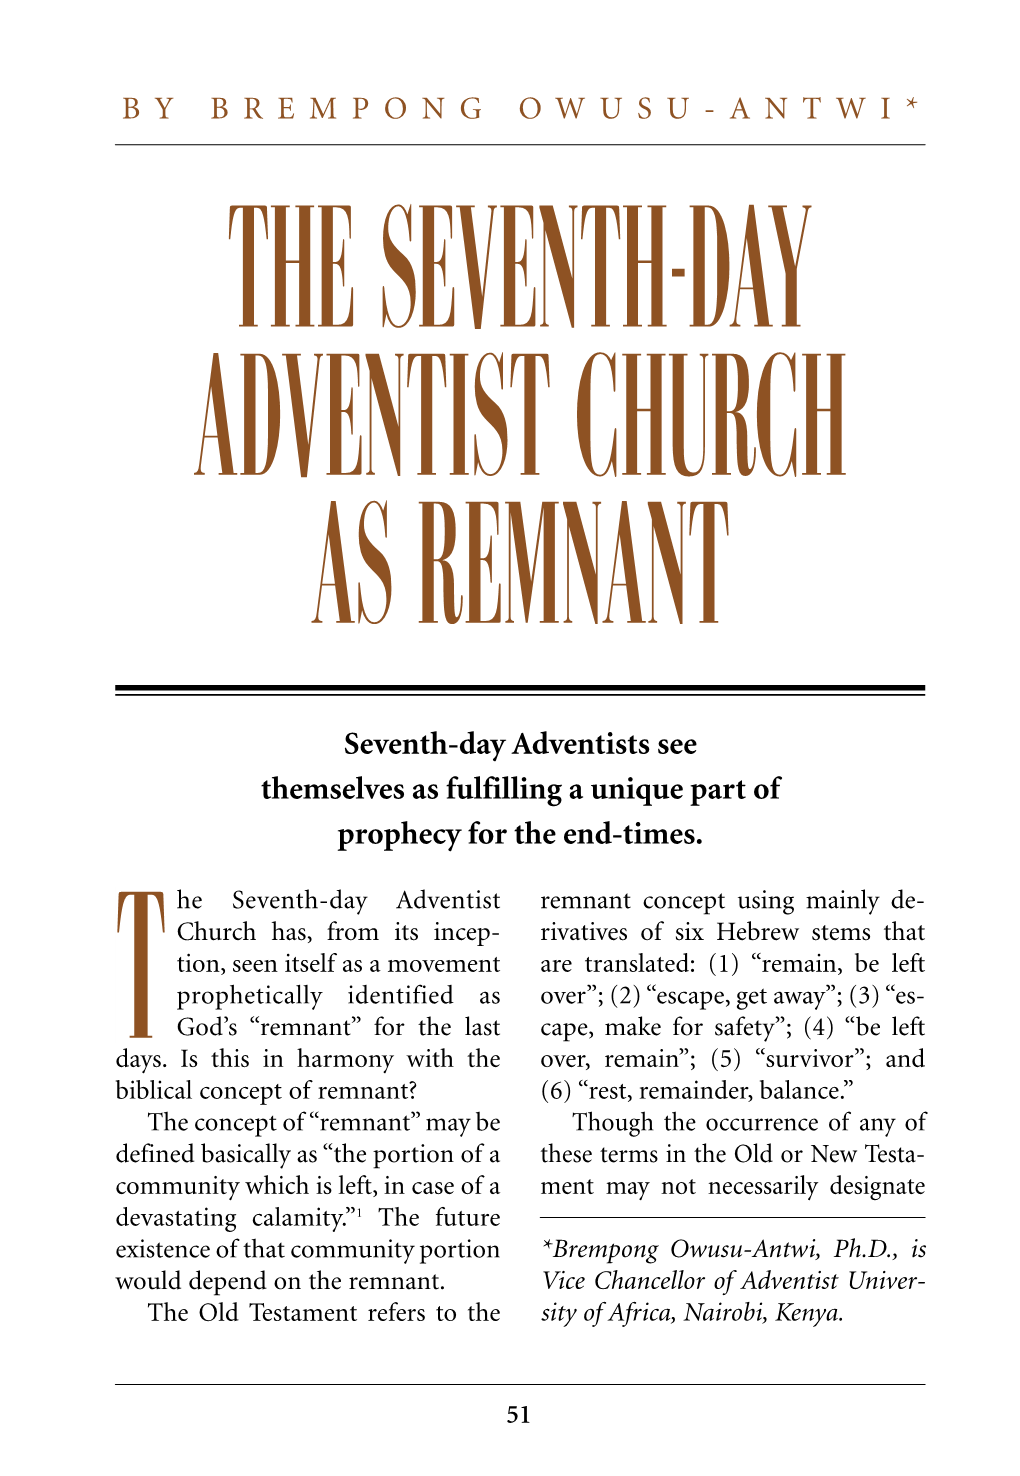 The Seventh-Day Adventist Church As Remnant Art 7